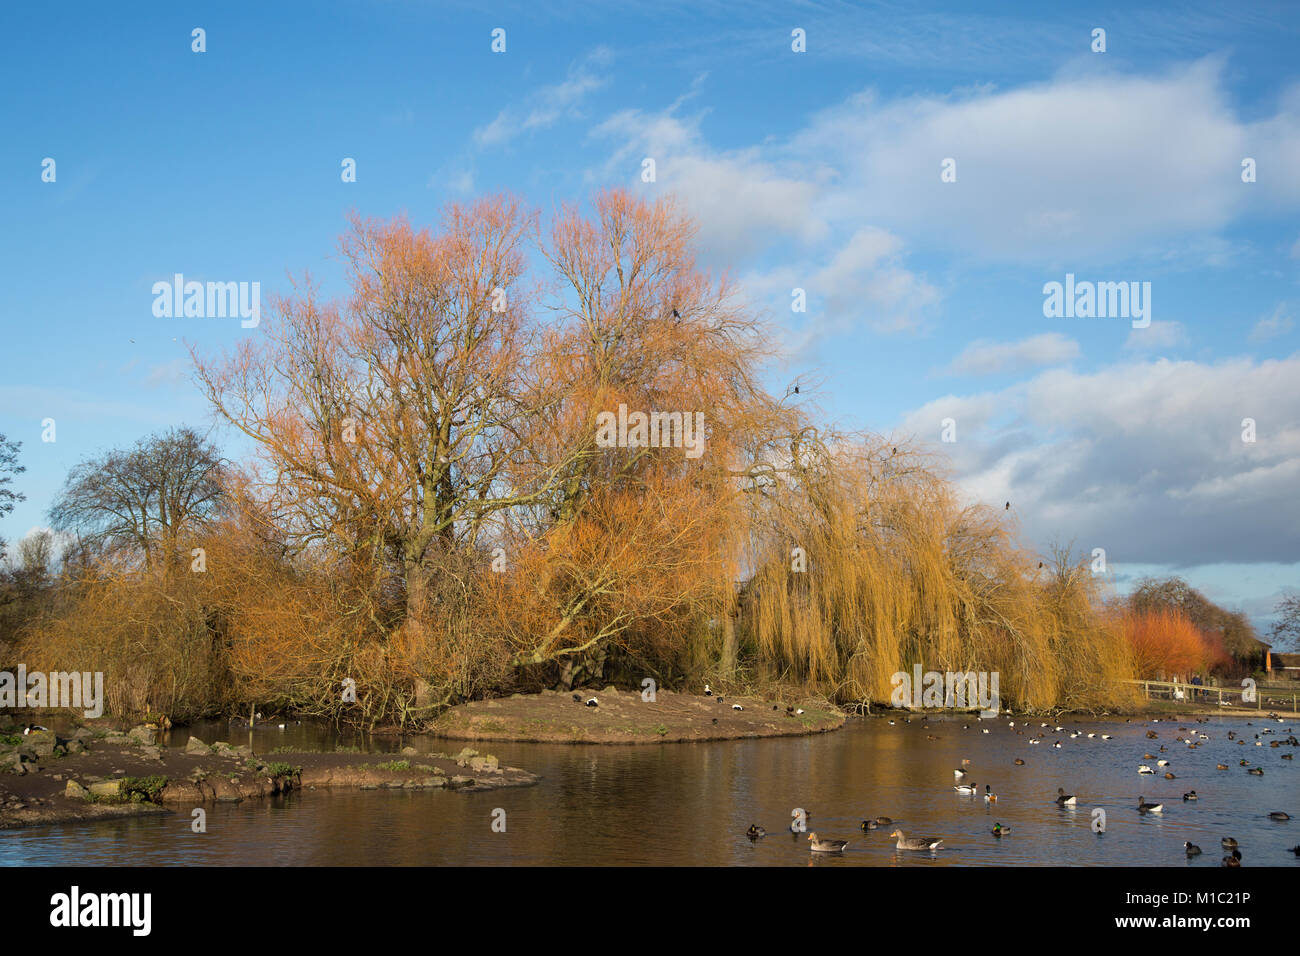 Colourful willow trees, Salix species, at the Wildfowl and Wetlands Trust, Slimbridge, Gloucestershire, UK. Stock Photo